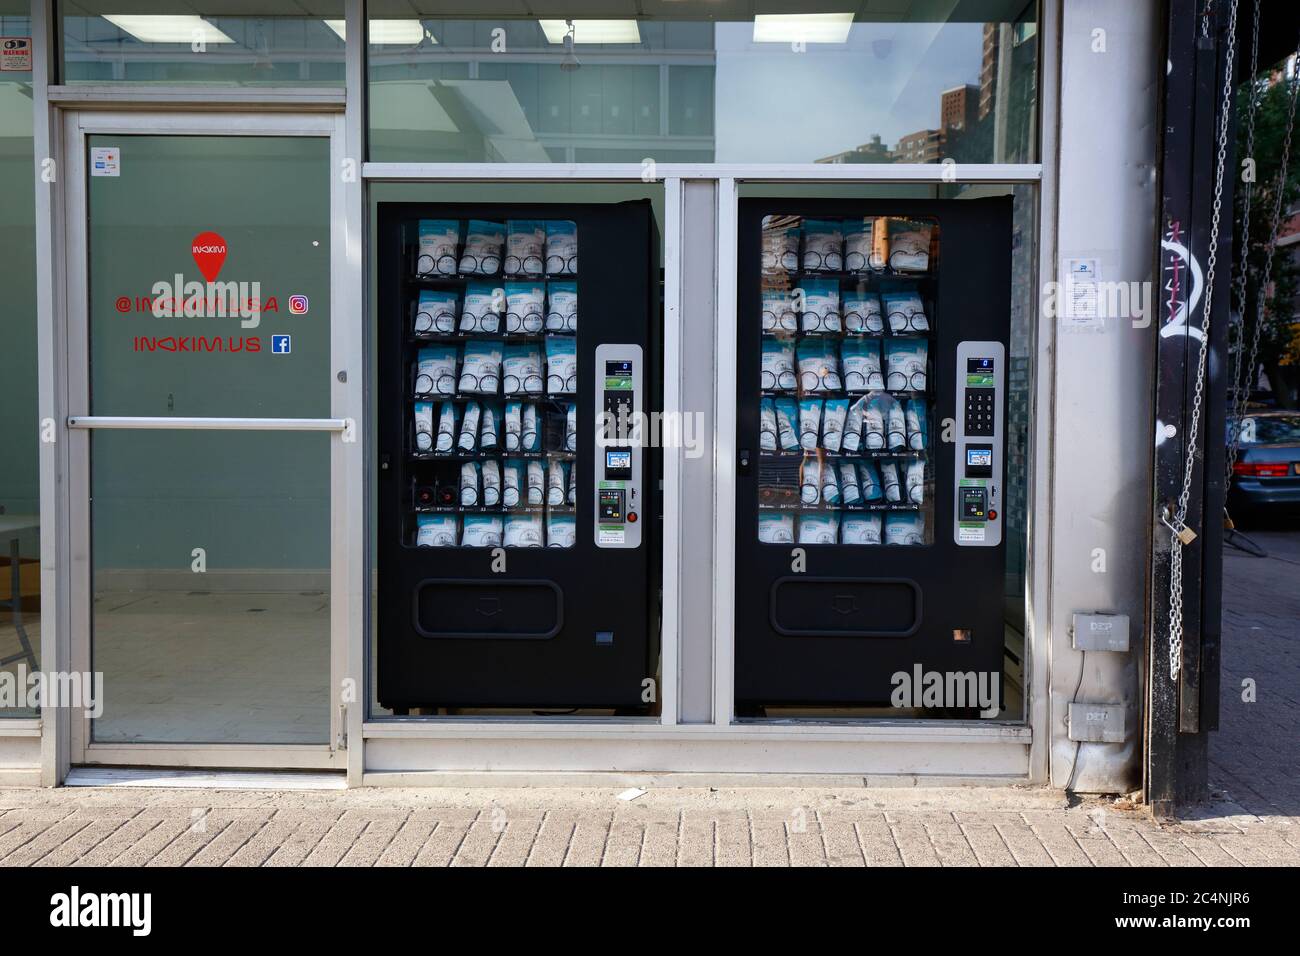 Vending machines containing KN95 respirator face masks operated by RapidMask2GO in a Manhattan storefront in New York City. Stock Photo